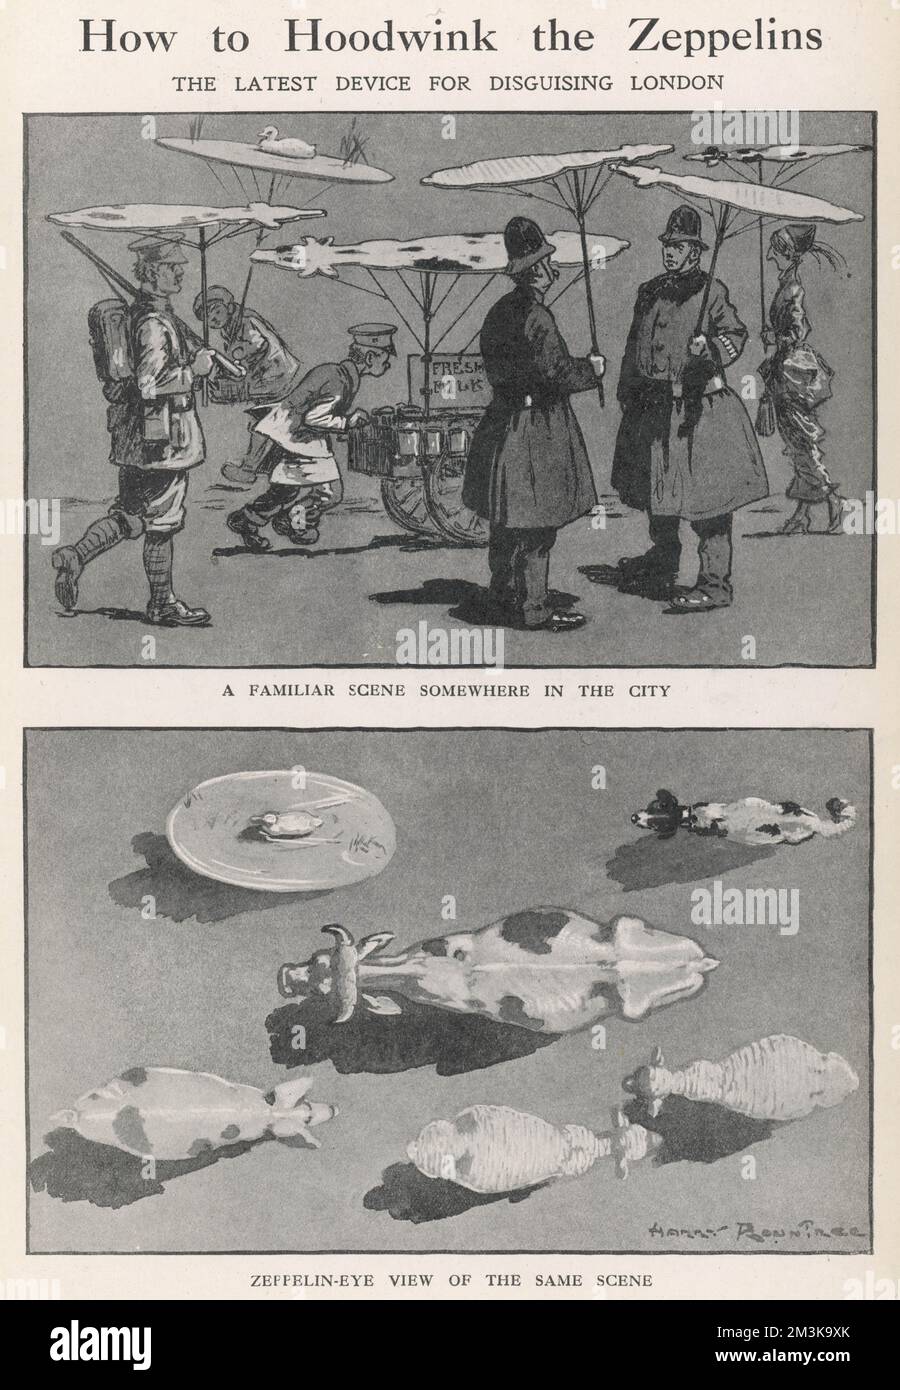 The latest device for disguising London from roving Zeppelins during World War One - ingenious umbrellas in the shape of various animals.     Date: 1914 Stock Photo